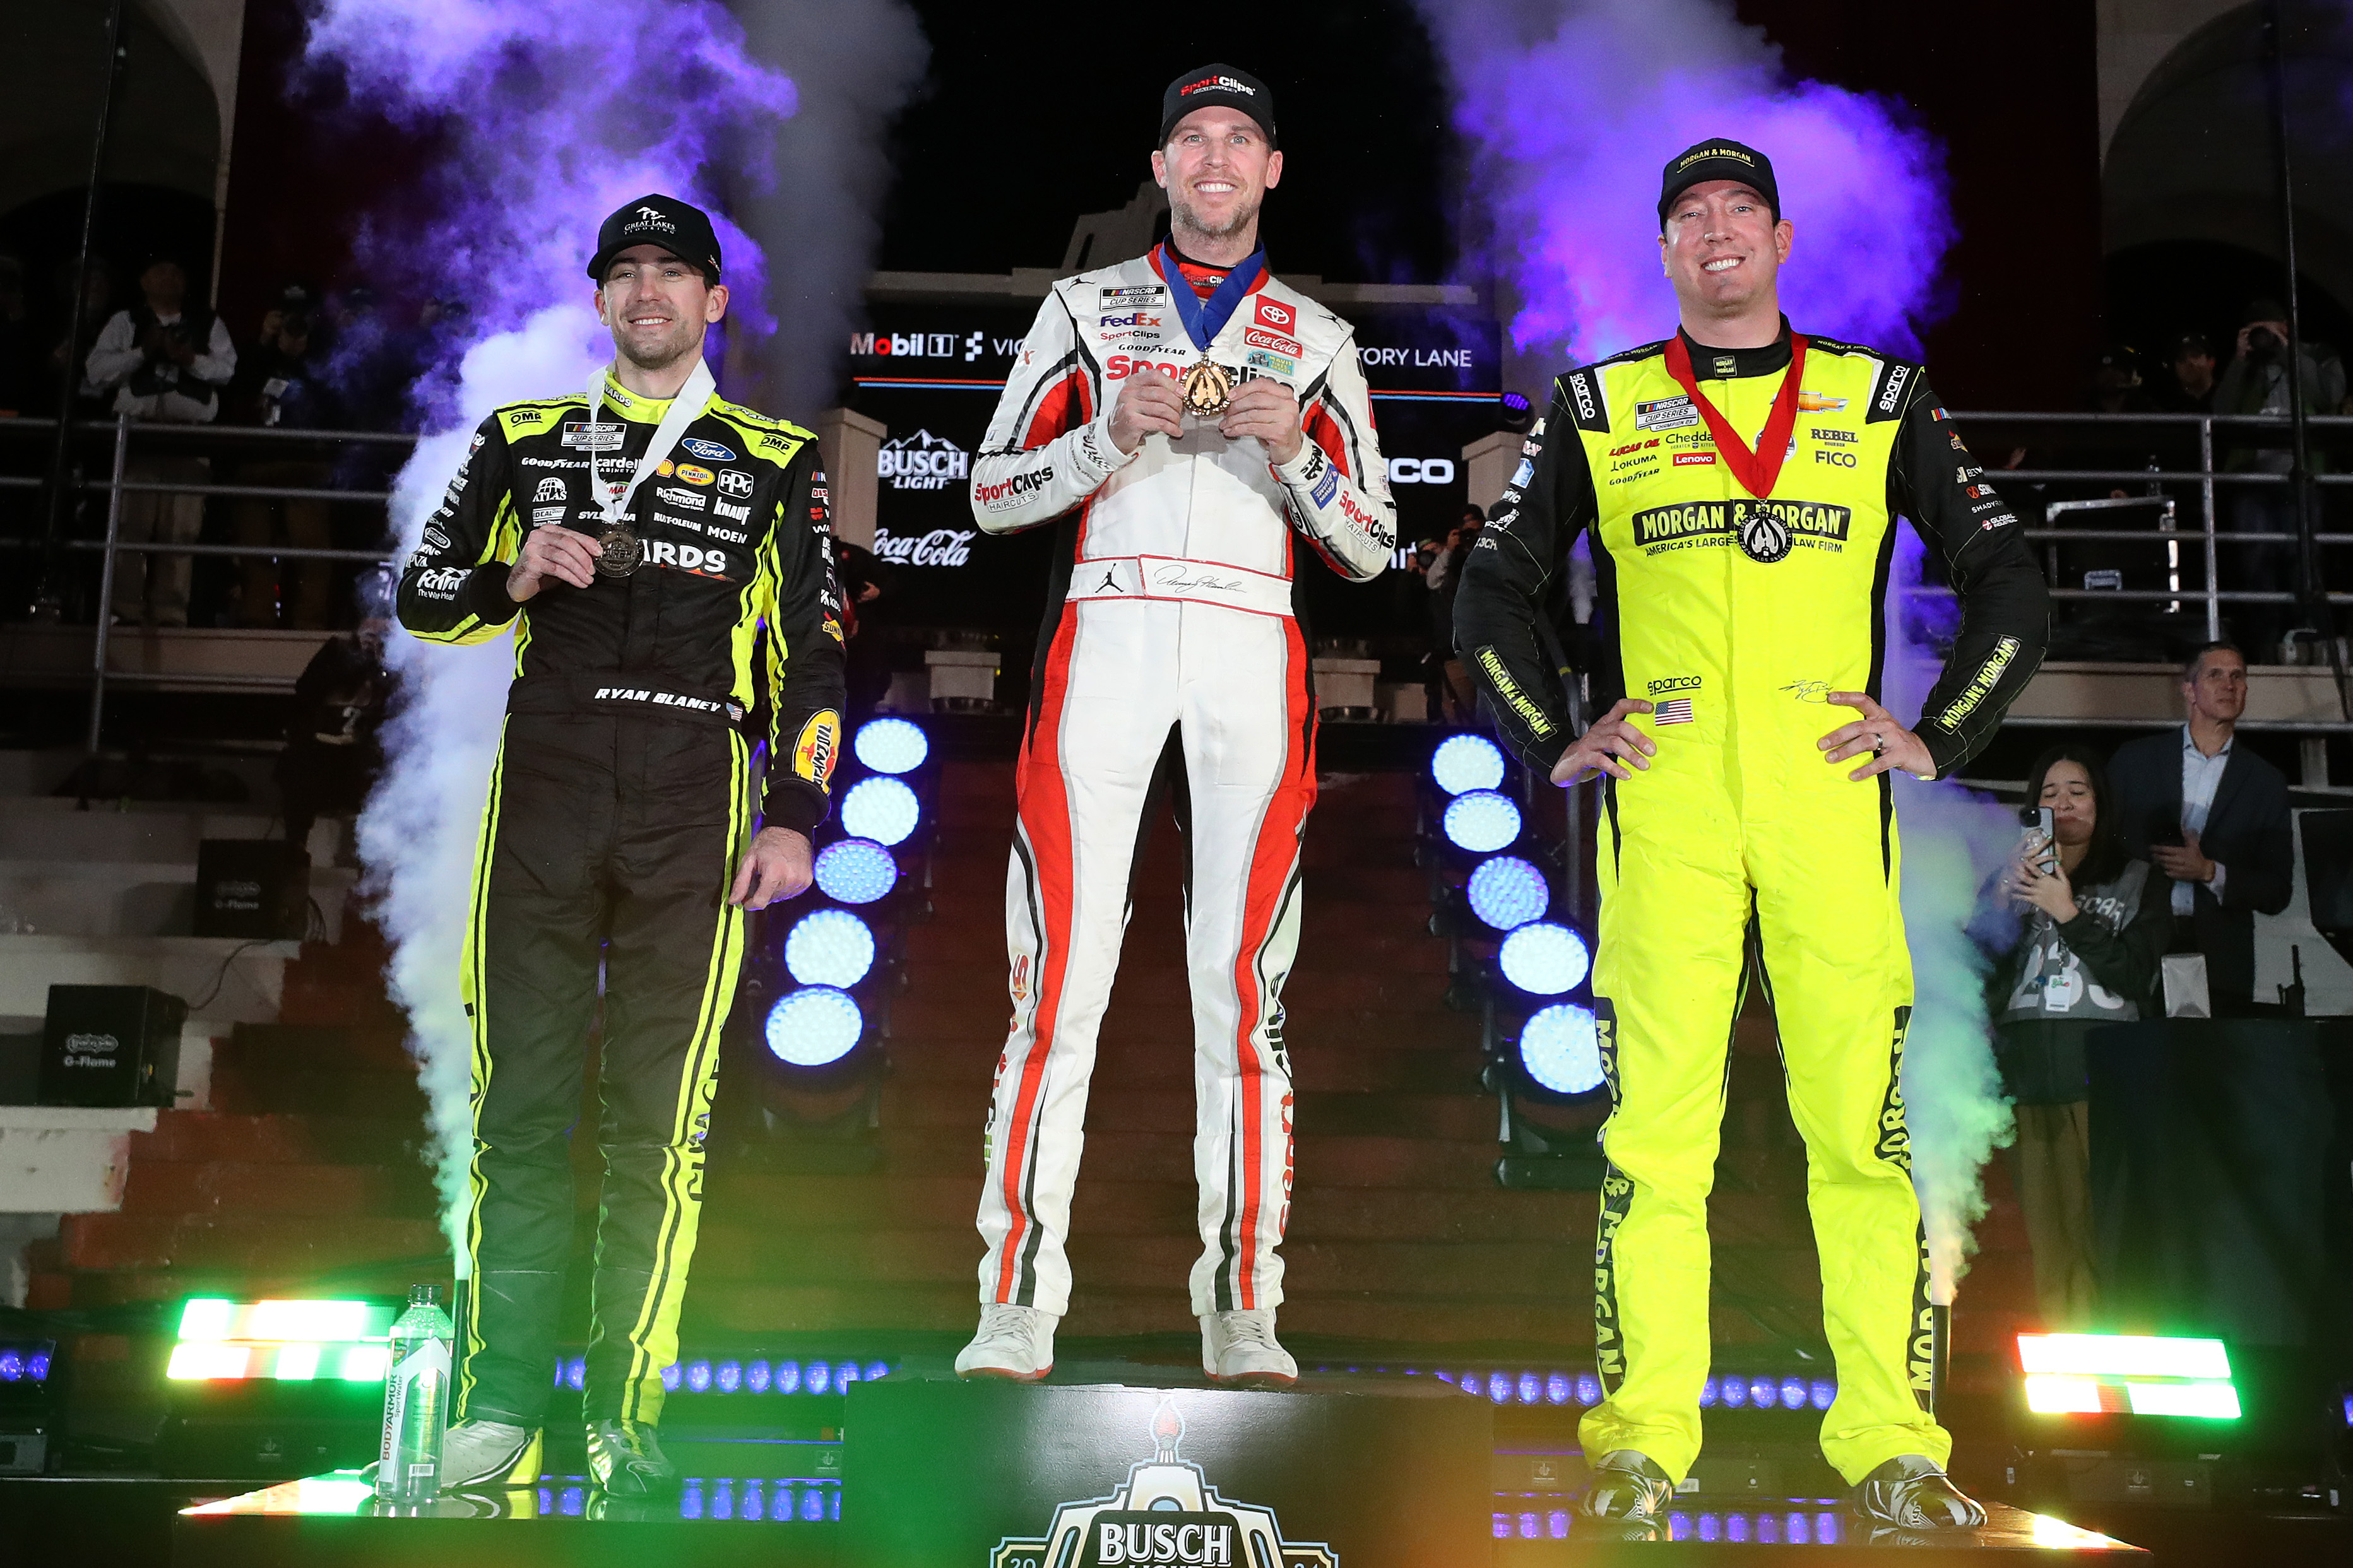 2024 Busch Clash winner Denny Hamlin (middle), second-place finisher Kyle Busch (right), and third-place finisher Ryan Blaney (left), pose on the podium in victory lane at the Los Angeles Memorial Coliseum on Saturday night. (Photo by Meg Oliphant/Getty Images)